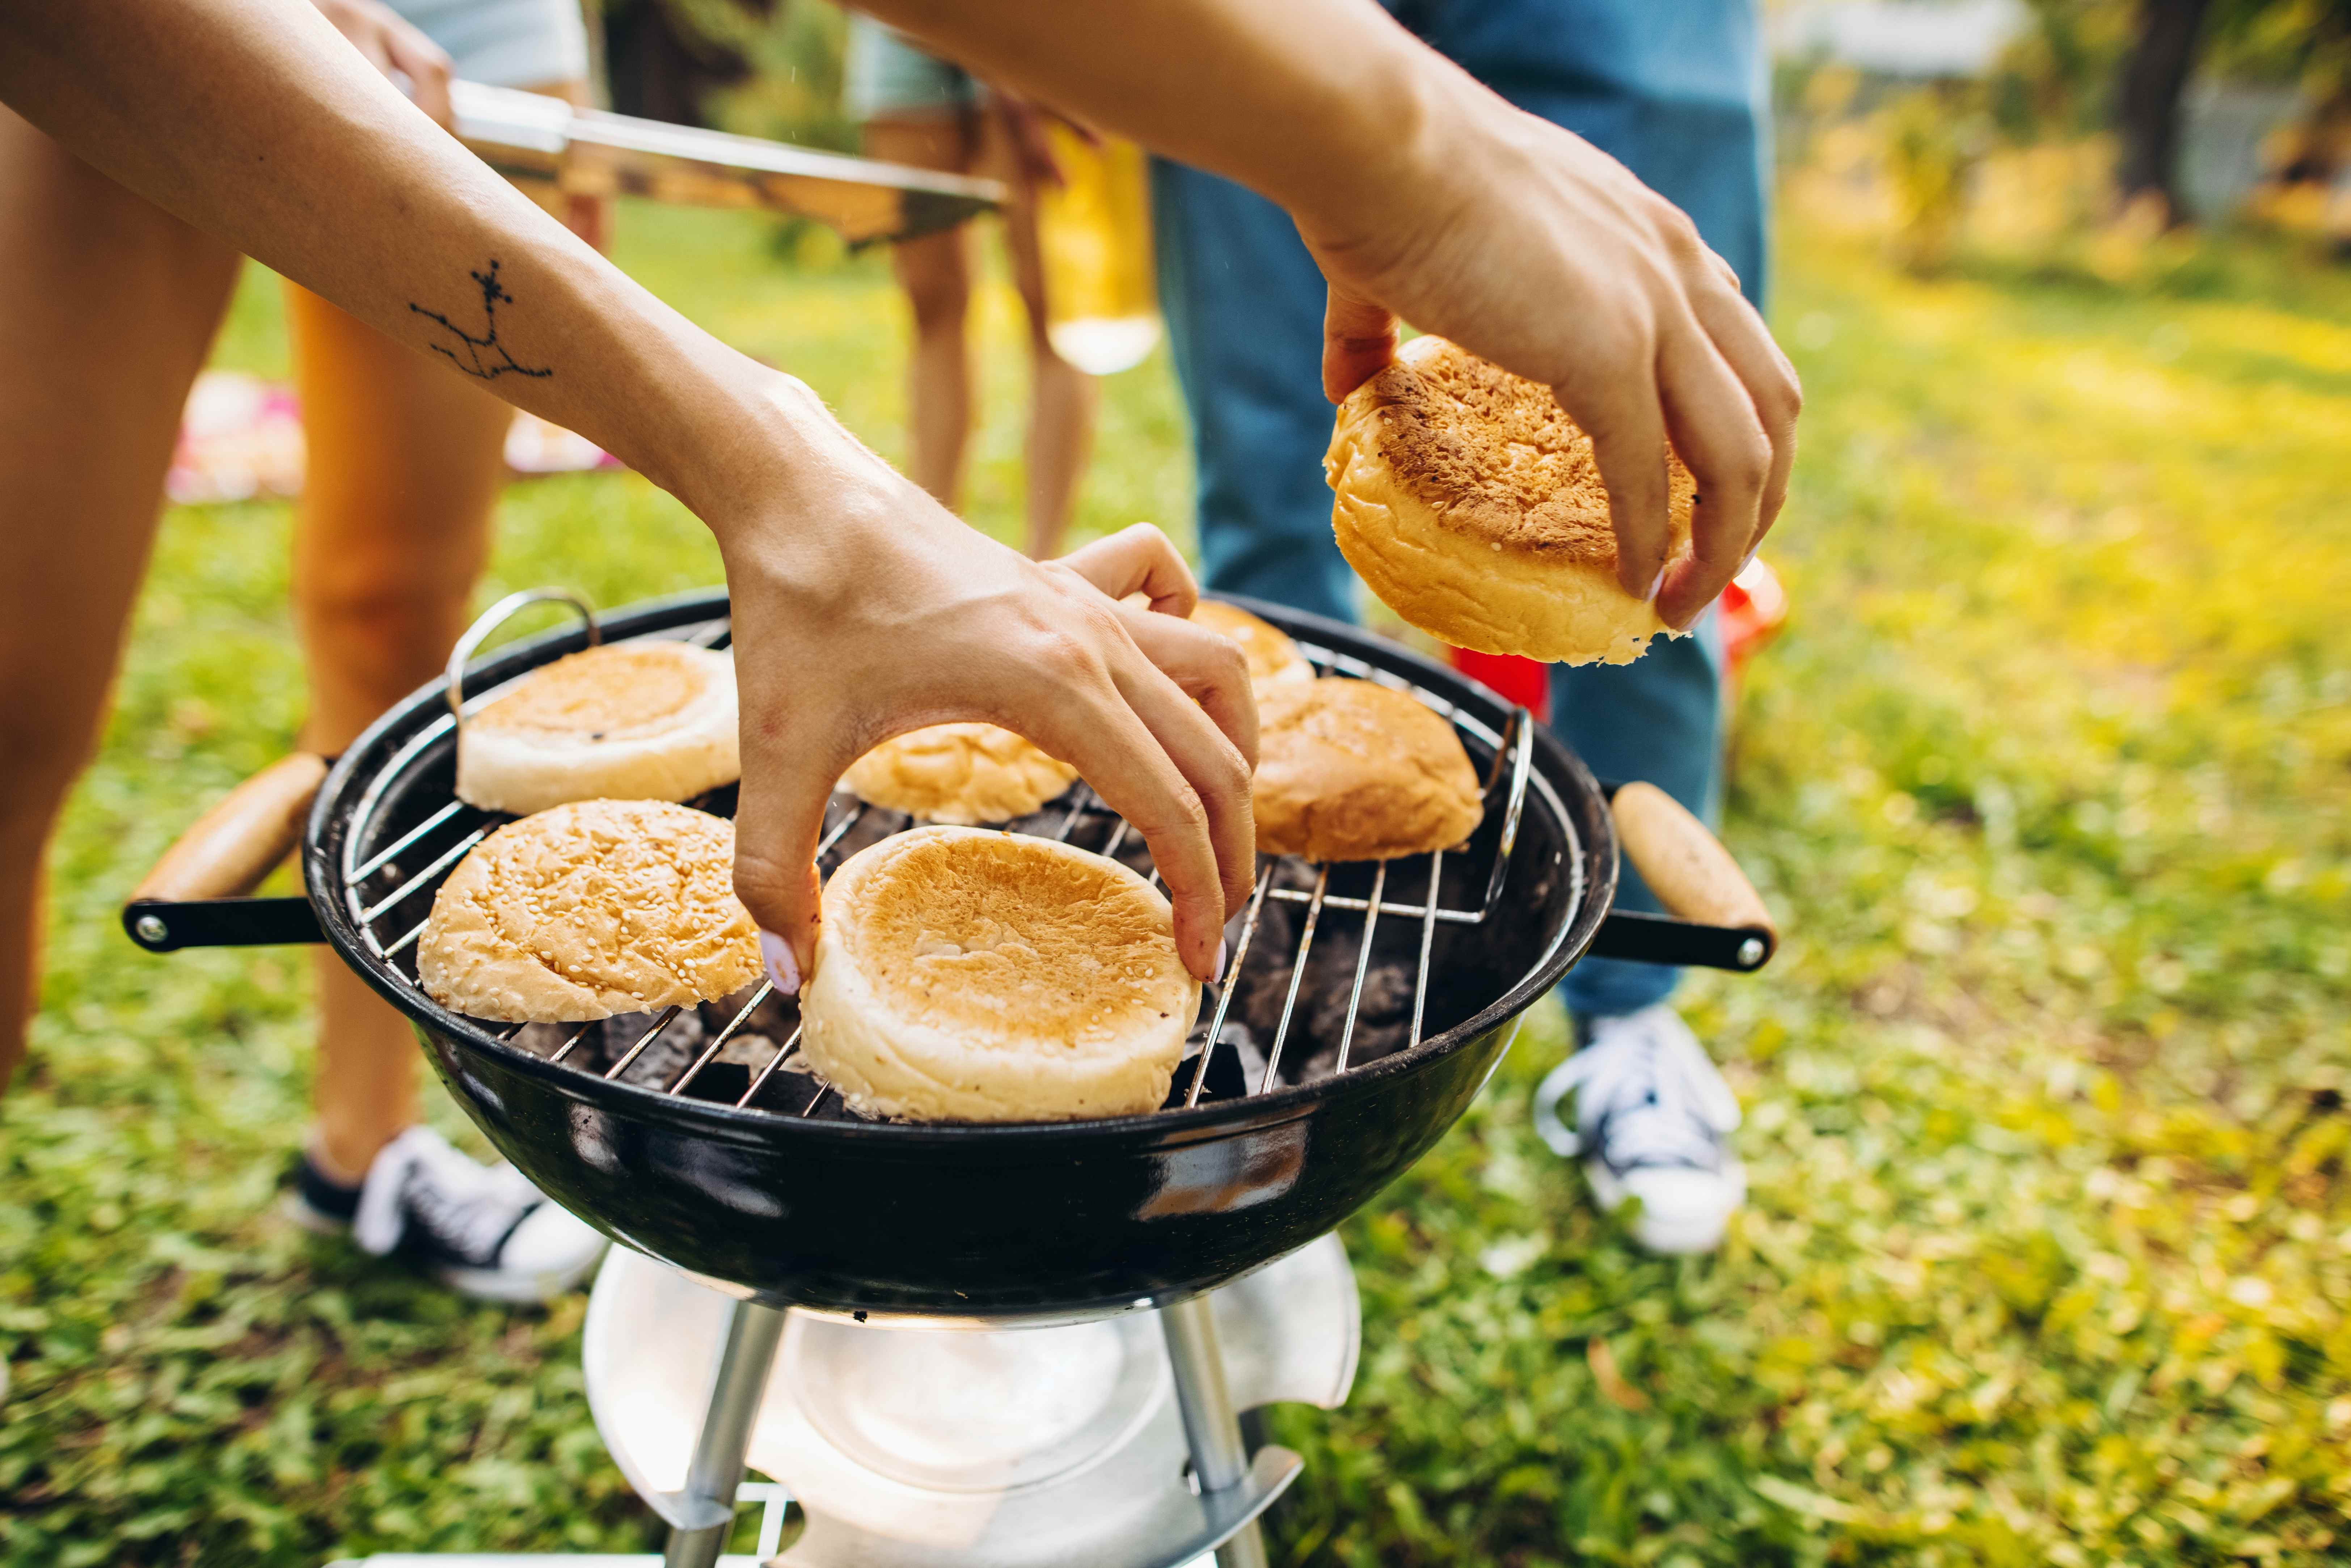 An amateur cook uses a small outdoor grill to make food for friends and family.